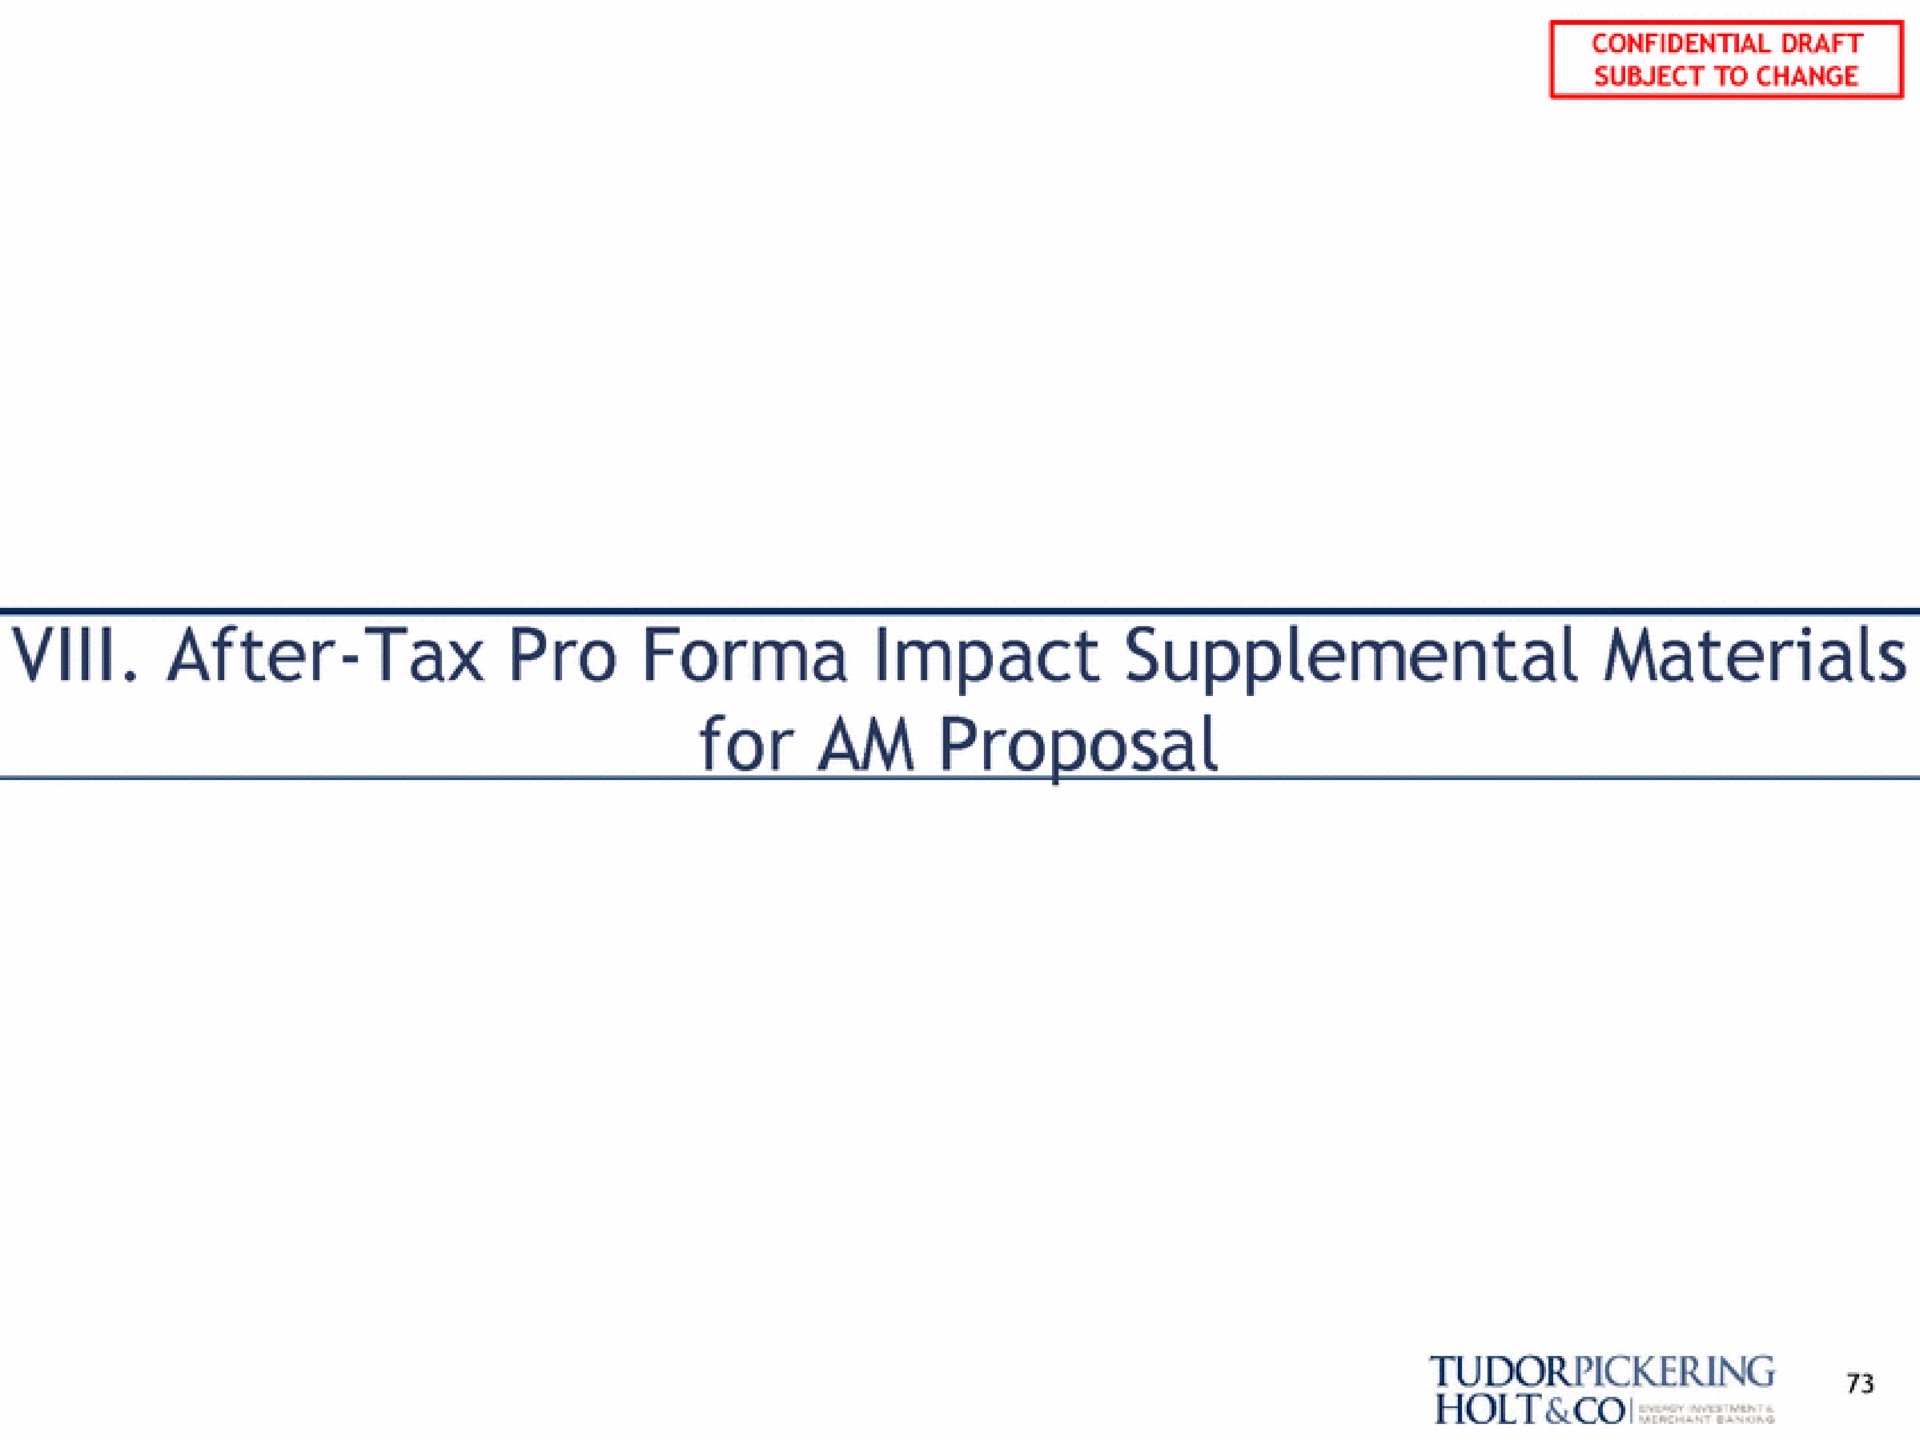 vill after tax pro impact supplemental materials for am proposal | Tudor, Pickering, Holt & Co